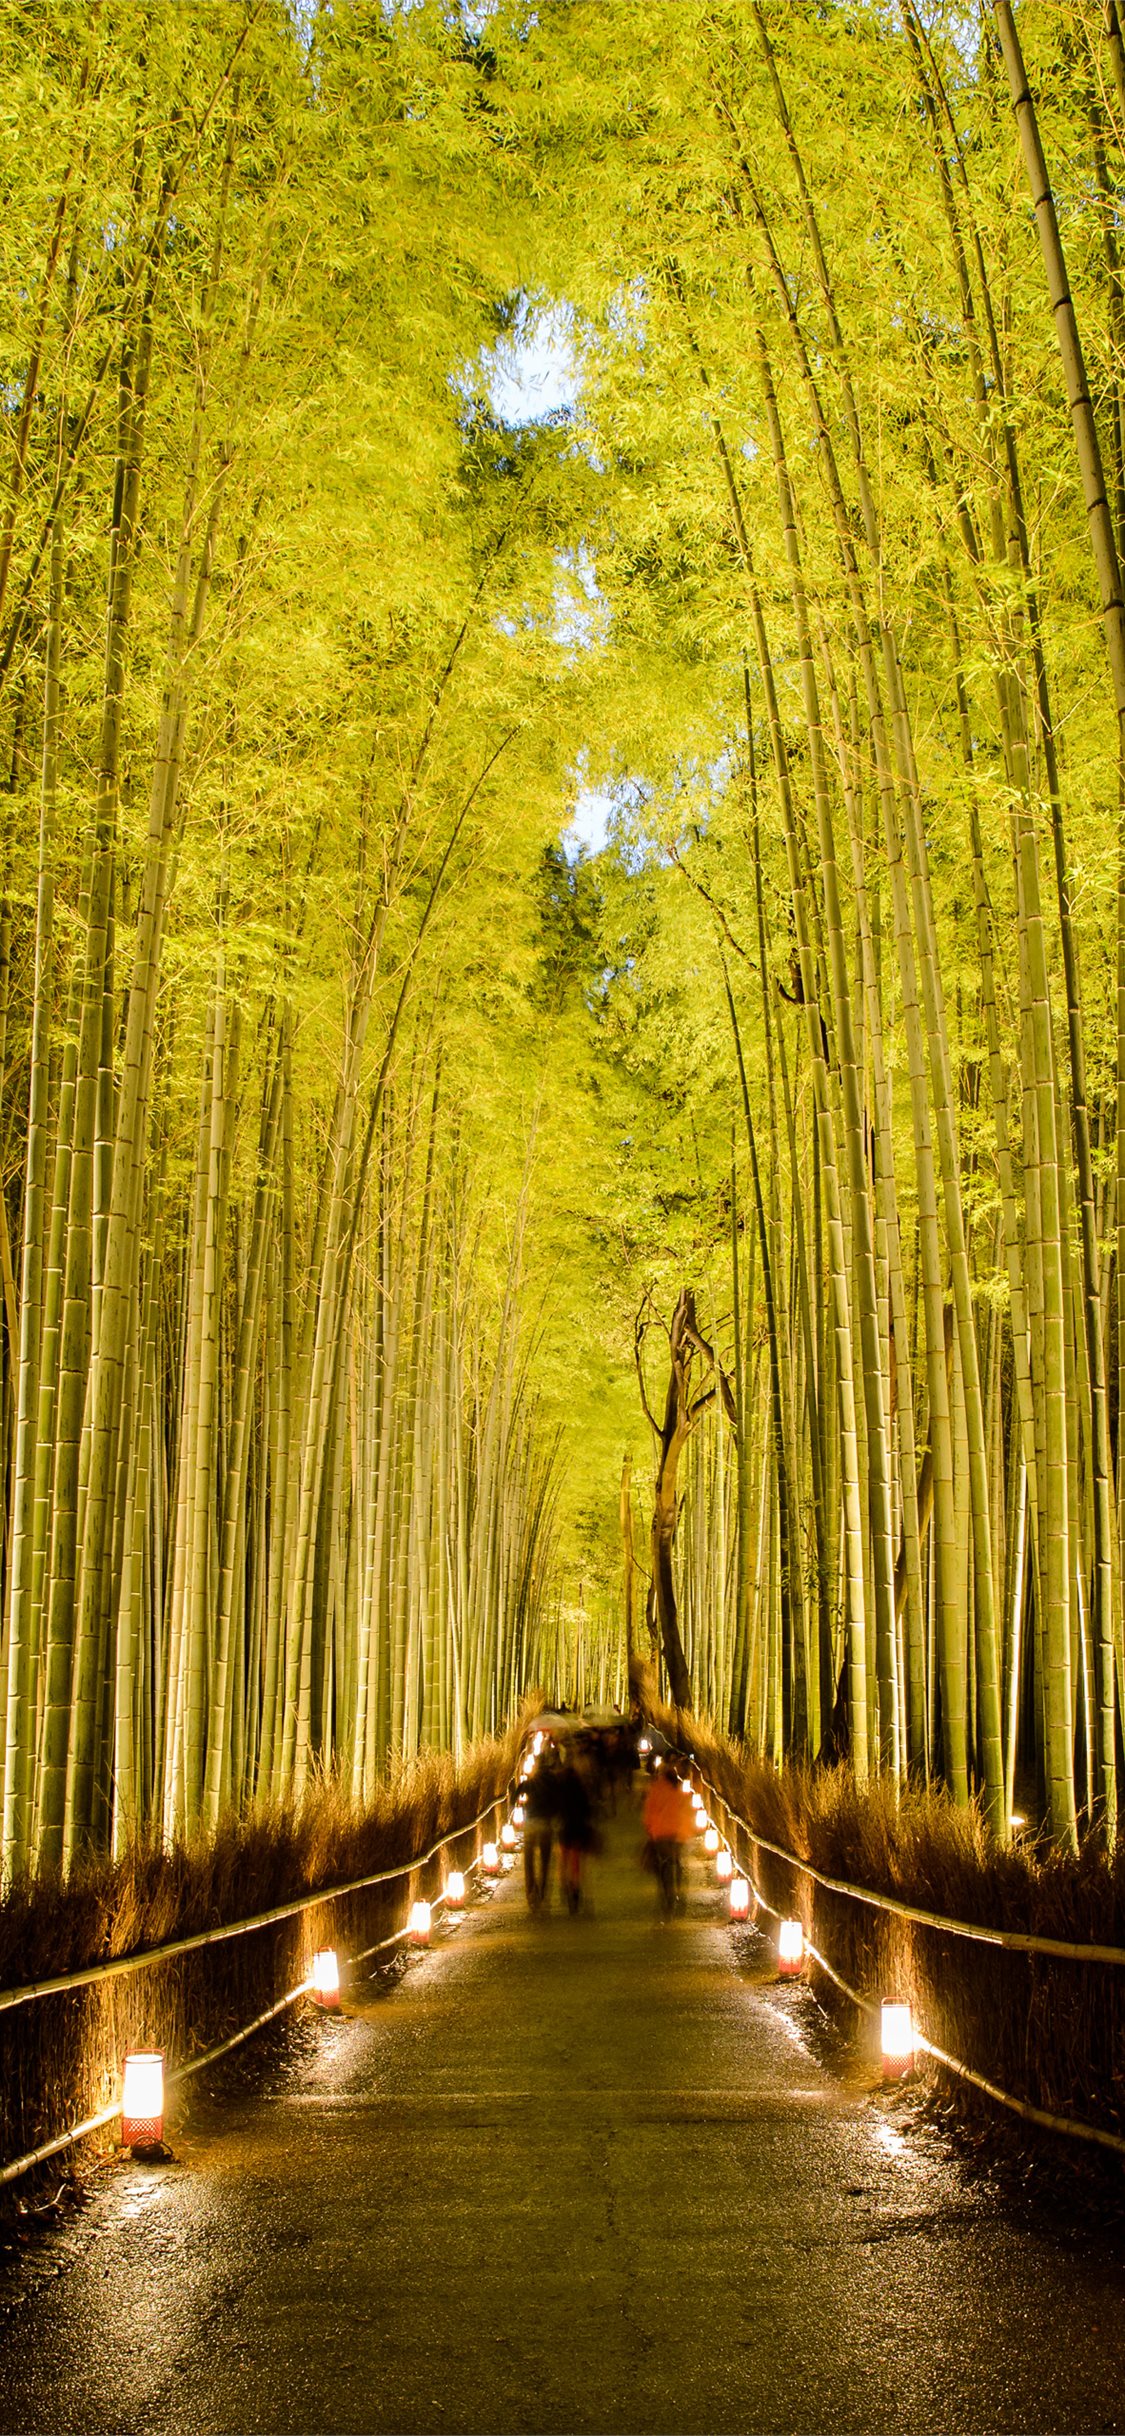 Sagano Bamboo Forest Iphone X Wallpapers Free Download